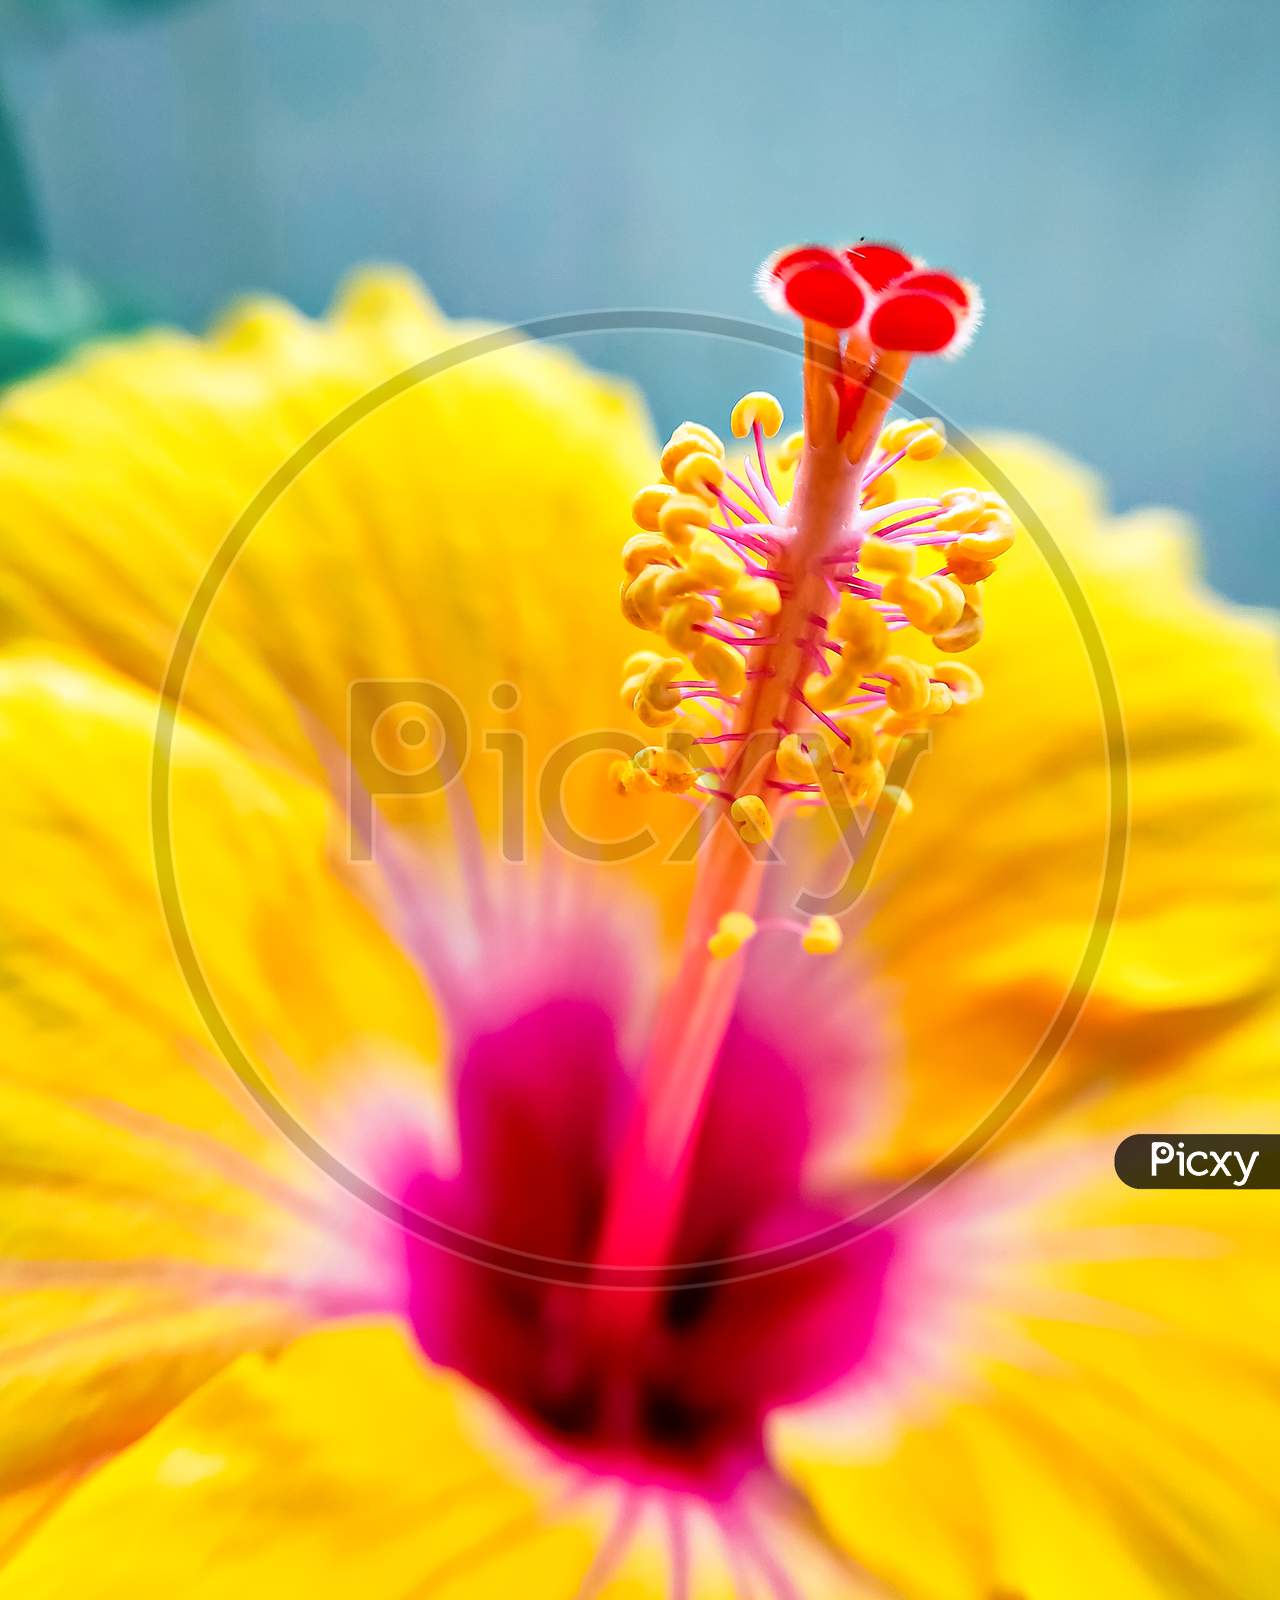 Close-Up Of Pollen Grains On Stigma Of An Yellow Hibiscus Flower.